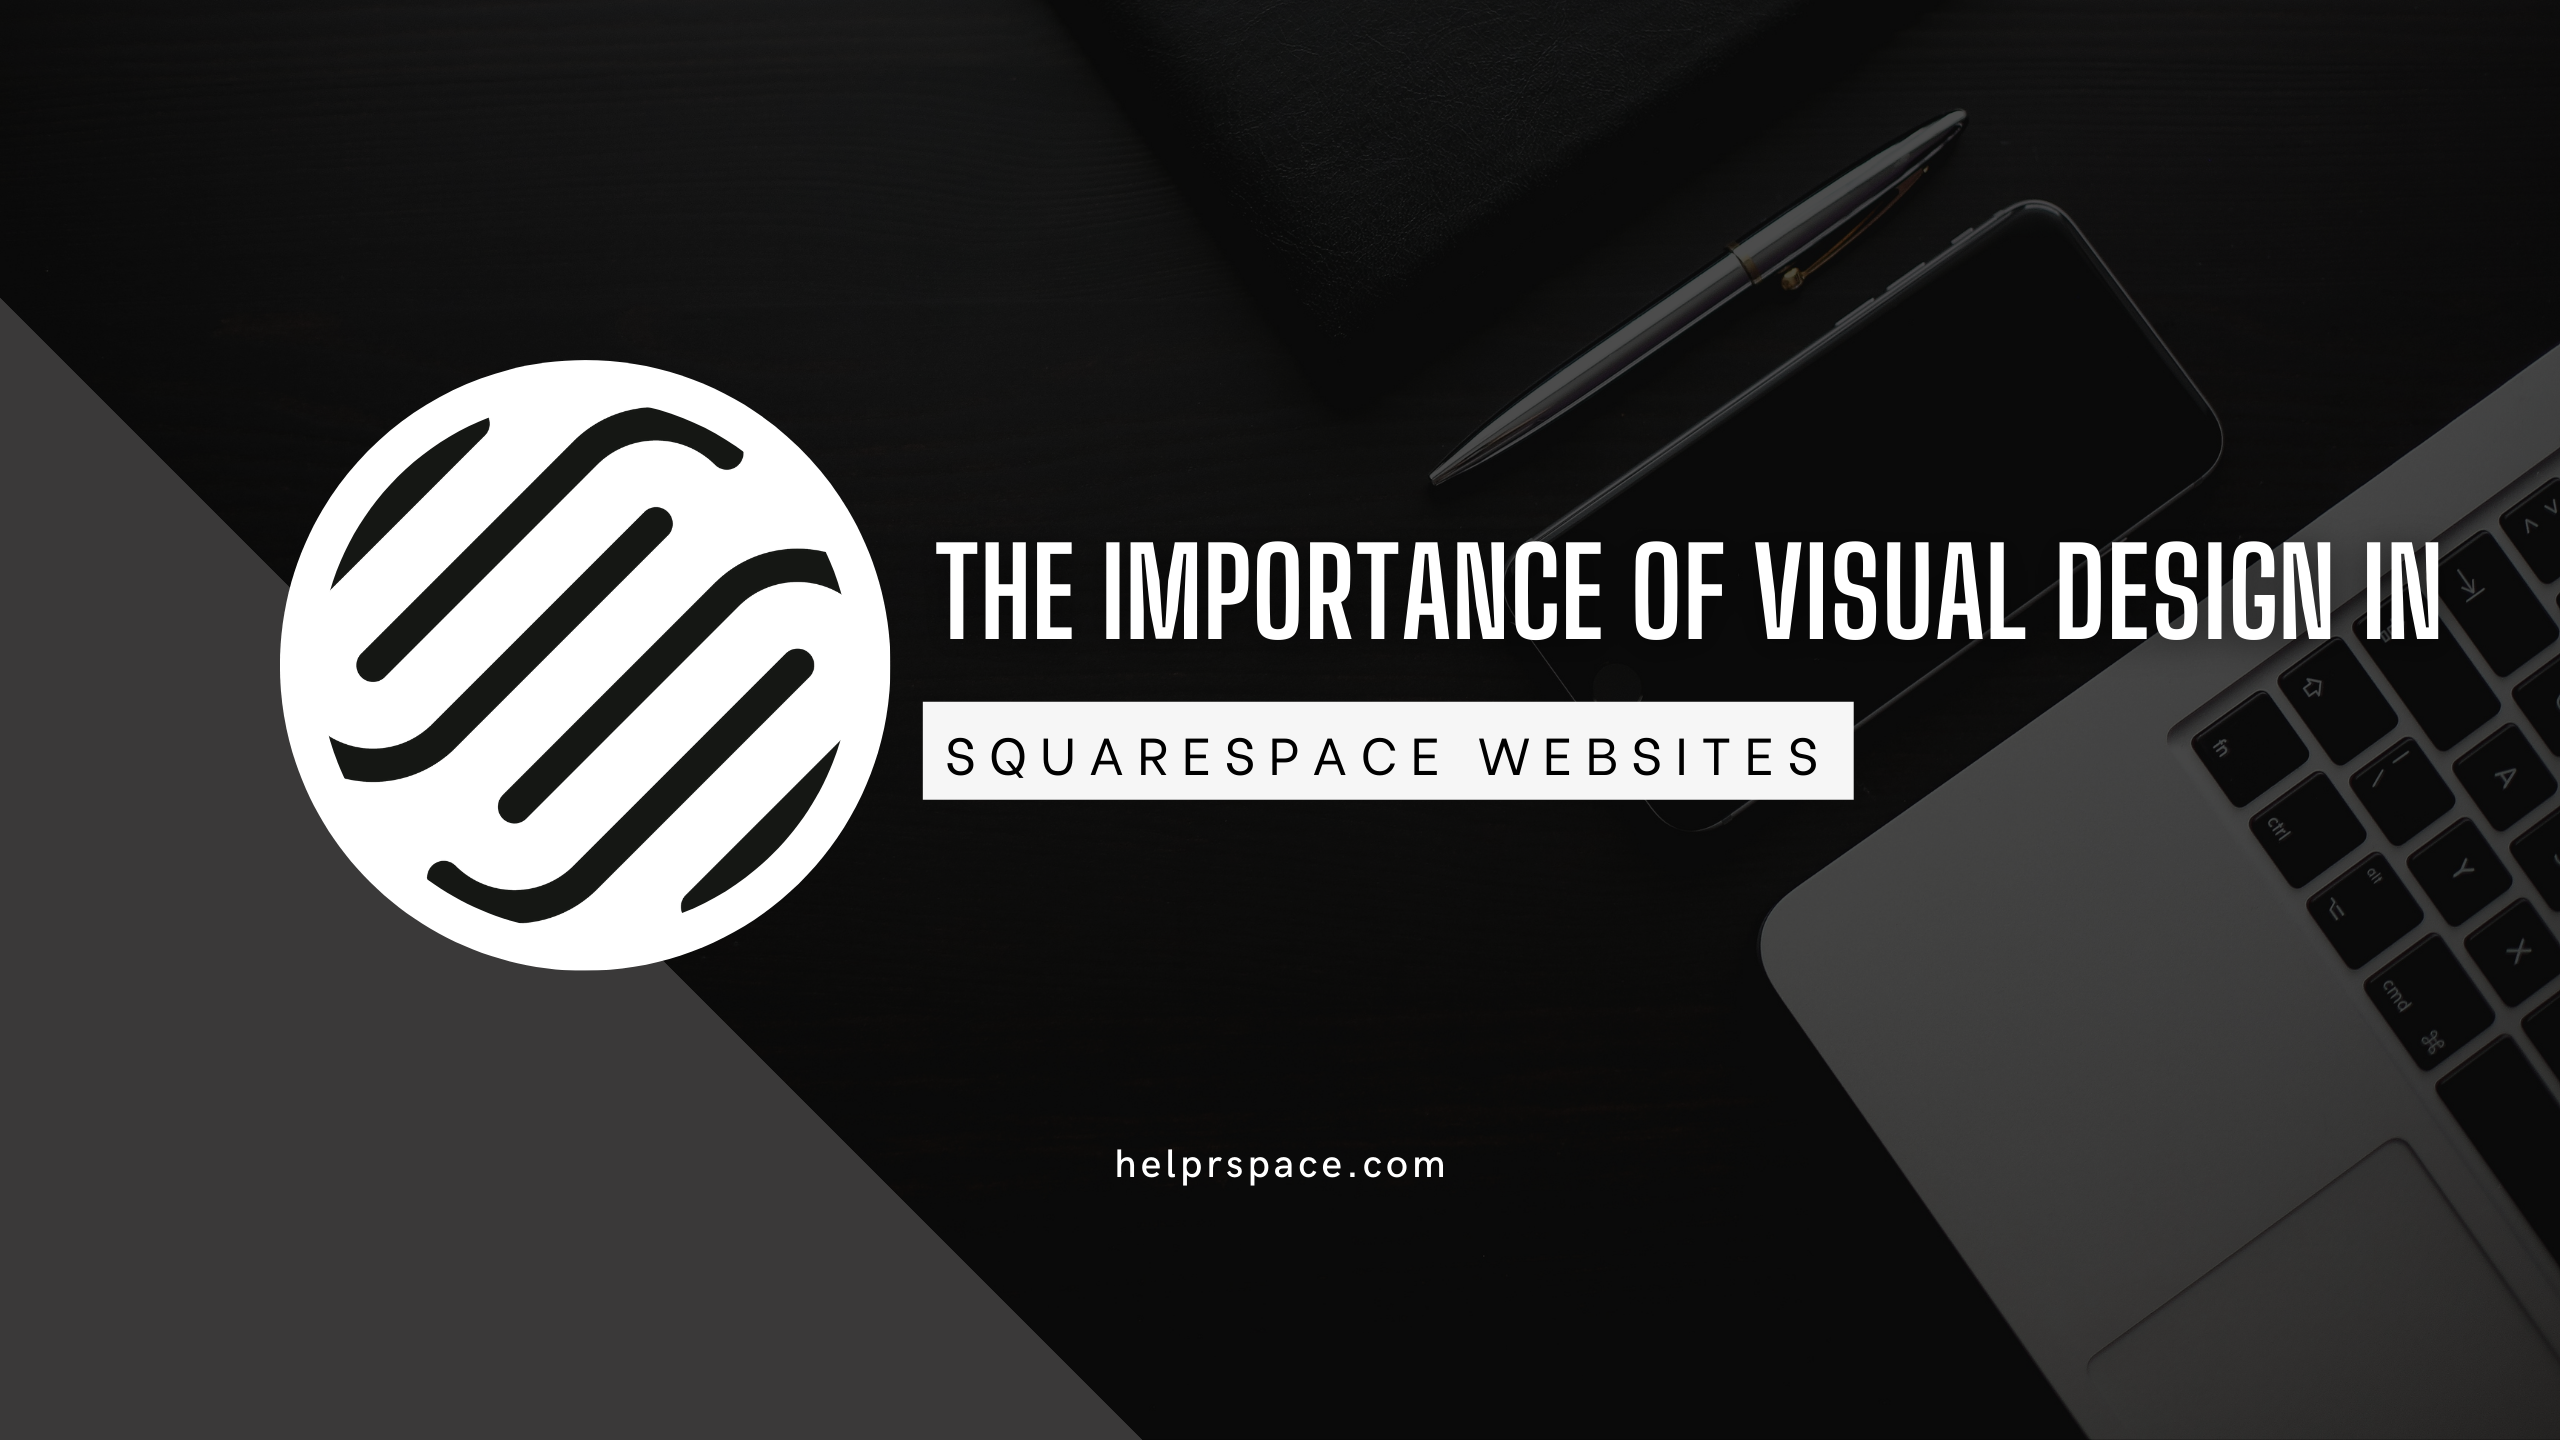 The Importance of Visual Design in Squarespace Websites